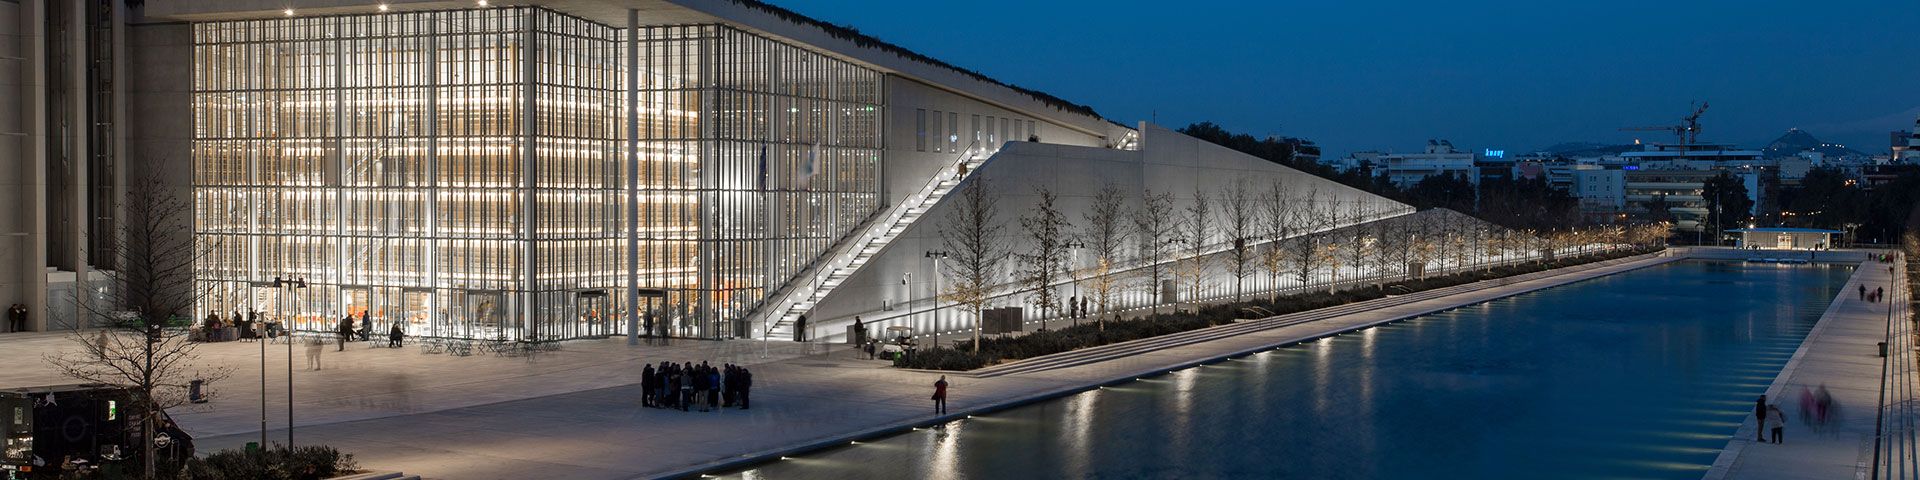 SNFCC Listed in Condé Nast Traveller’s “Art Lovers Guide to Athens” - Εικόνα